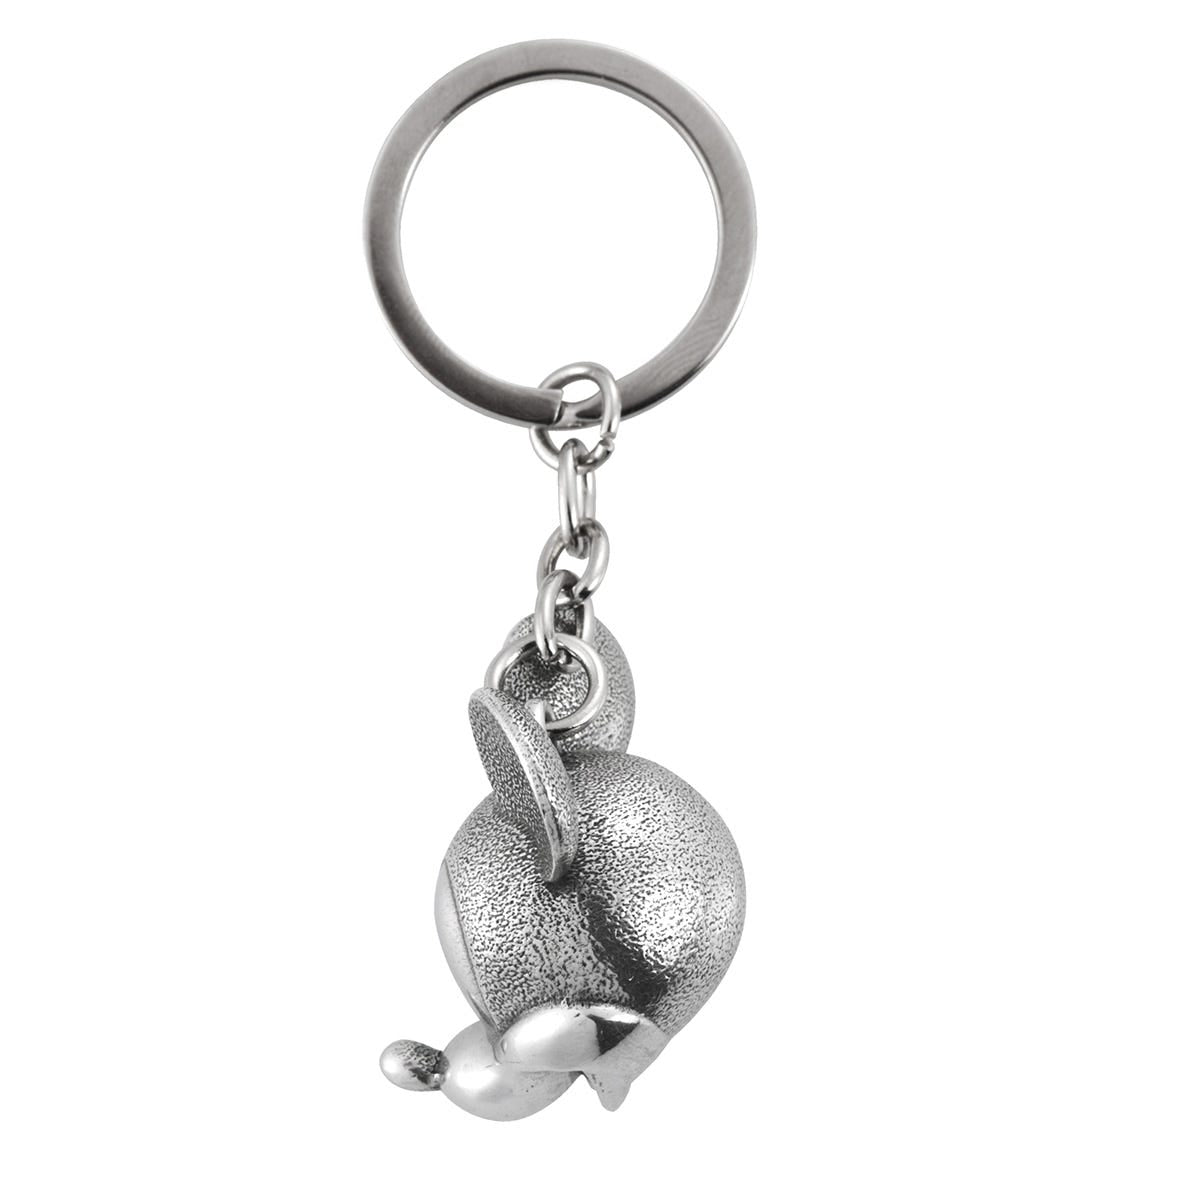 Royal Selangor Mickey Mouse Steamboat Willie 3D Keychain - Pewter